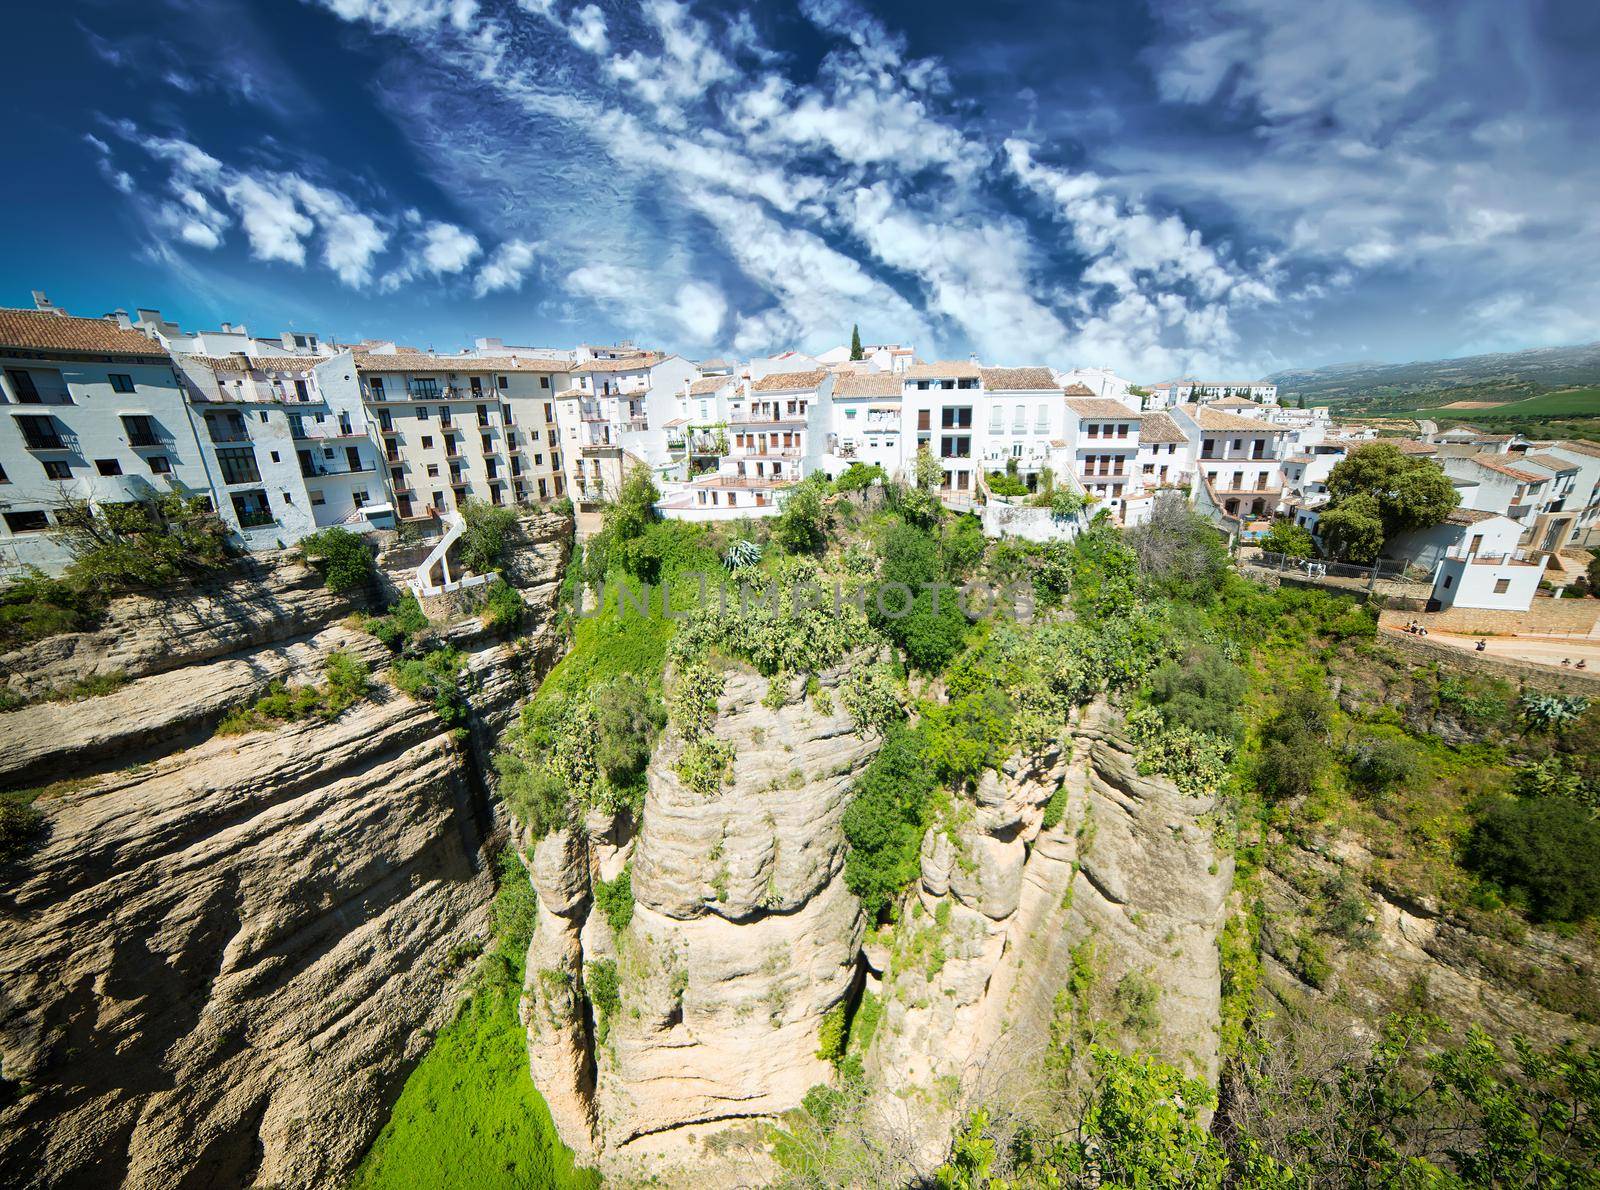 Panoramic view from New bridge in Ronda against sky in Andalucia, Spain